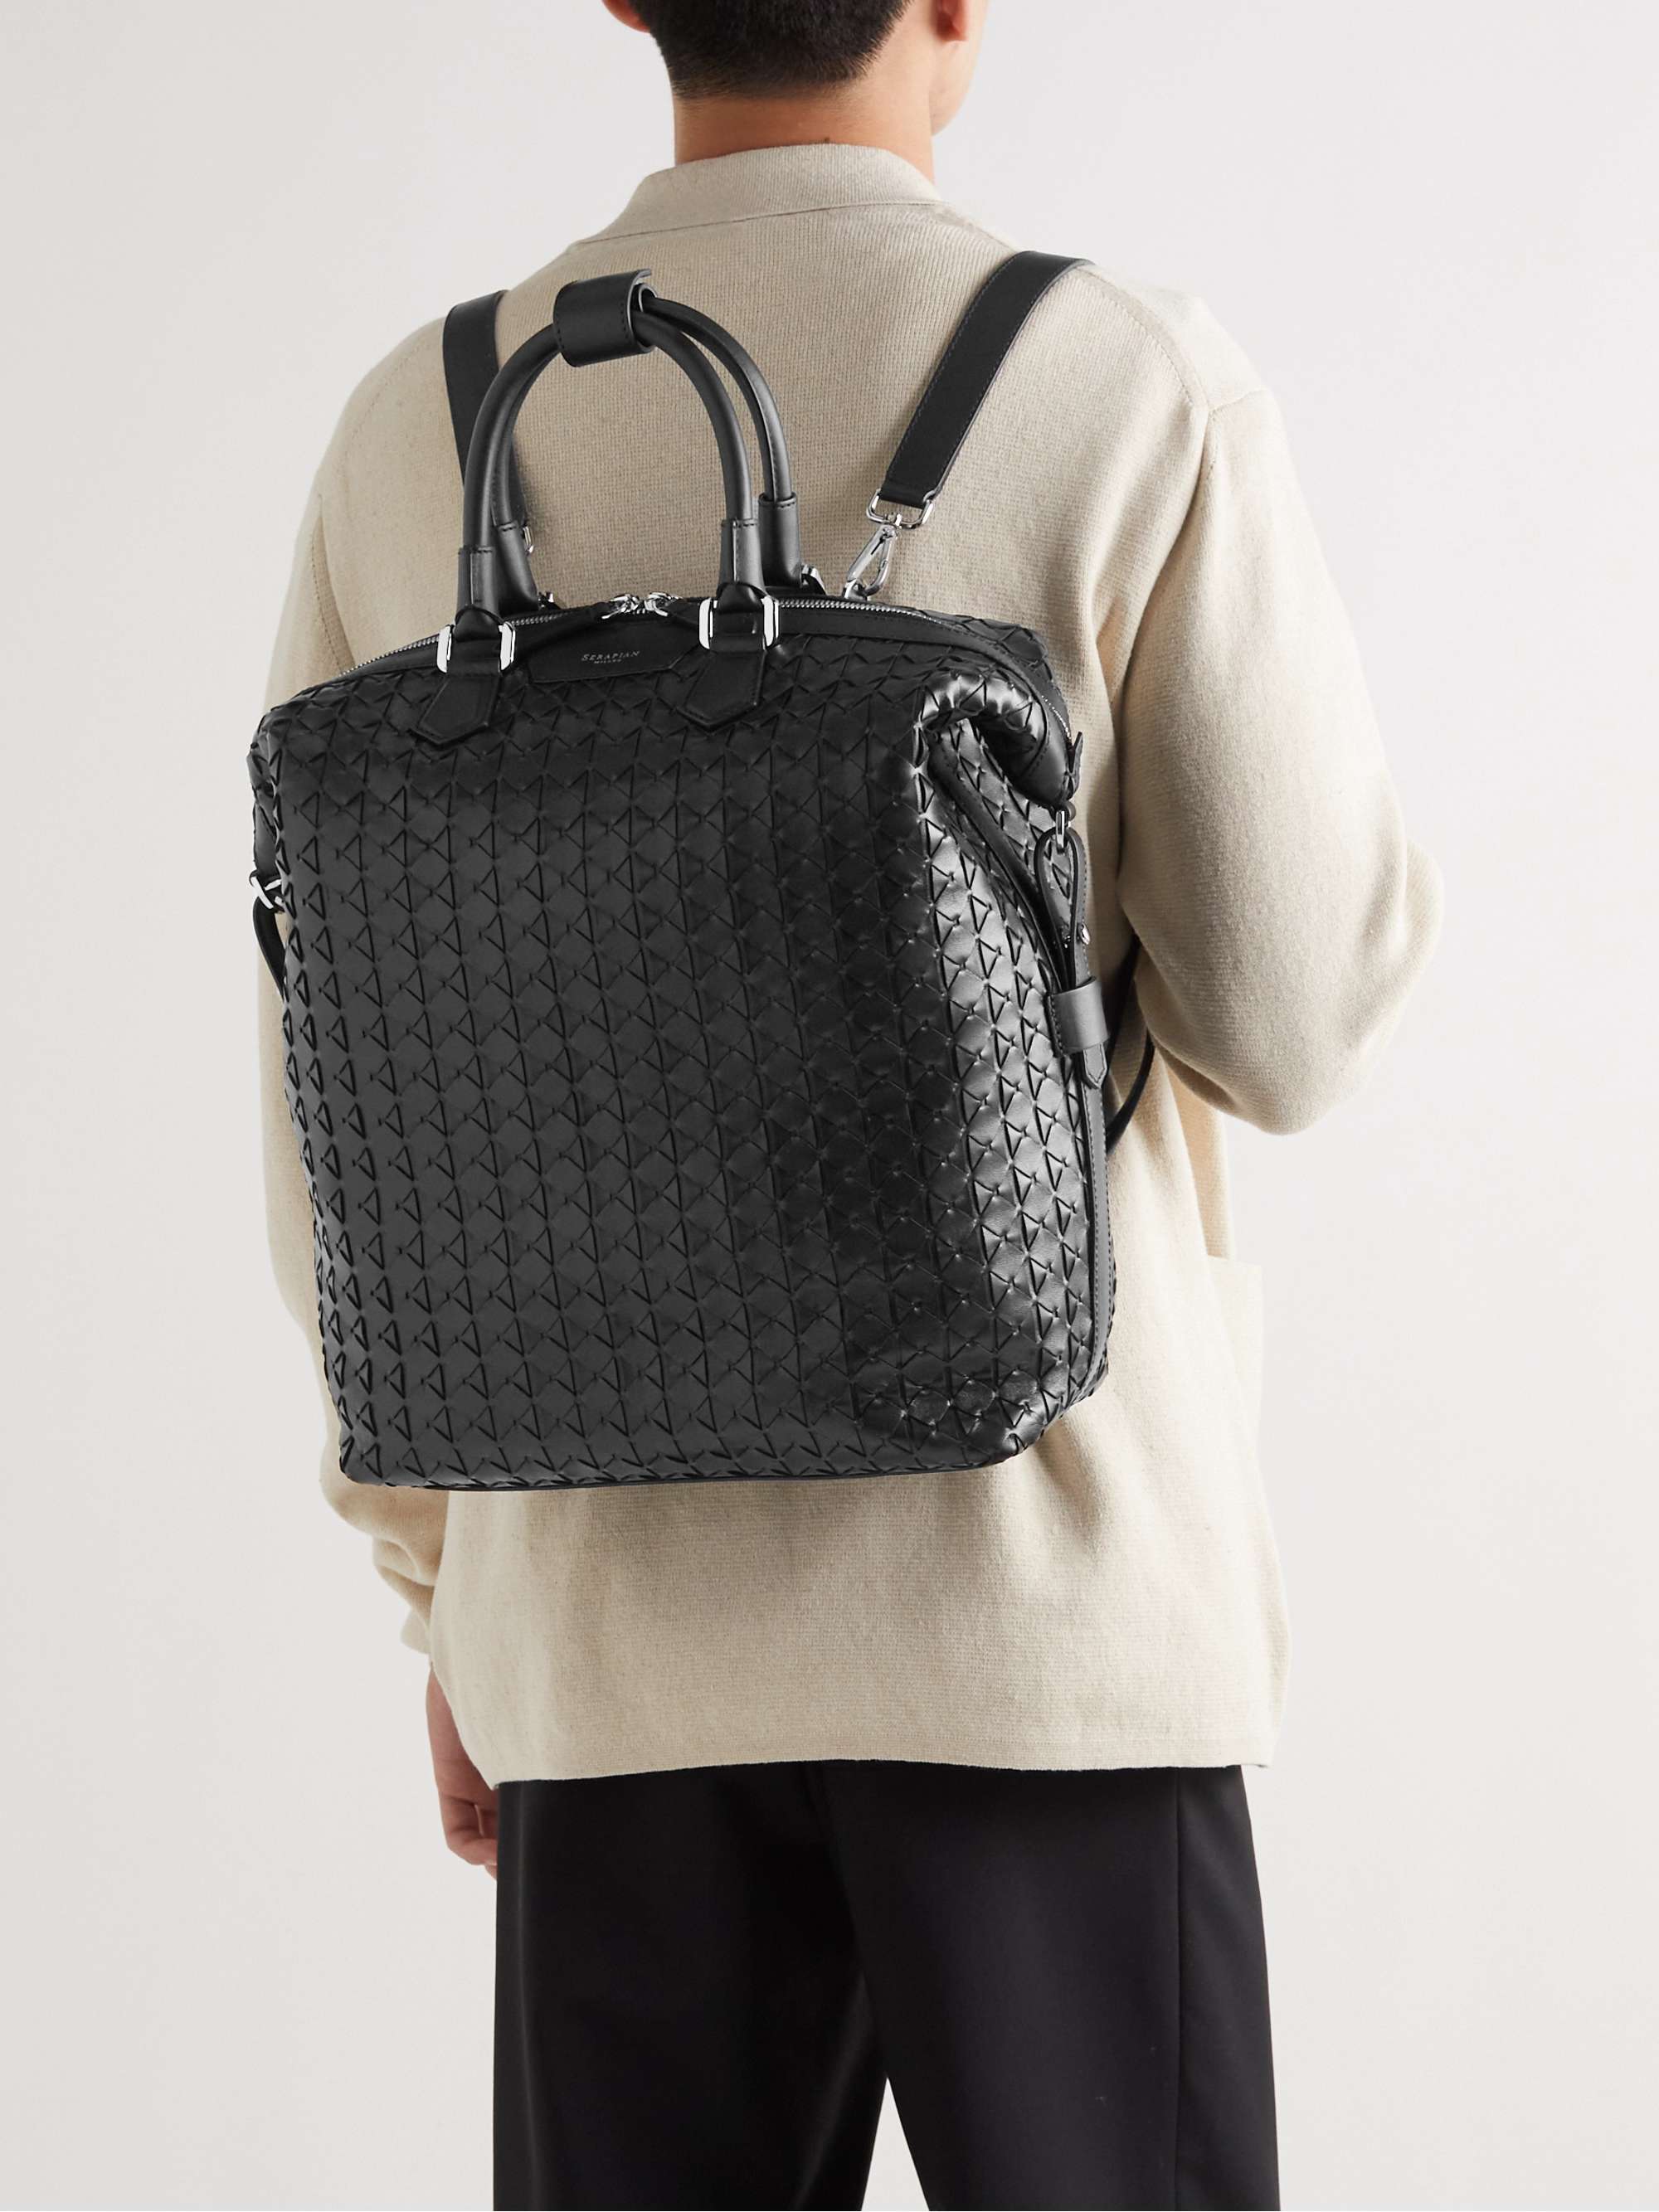 SERAPIAN Woven Leather Backpack